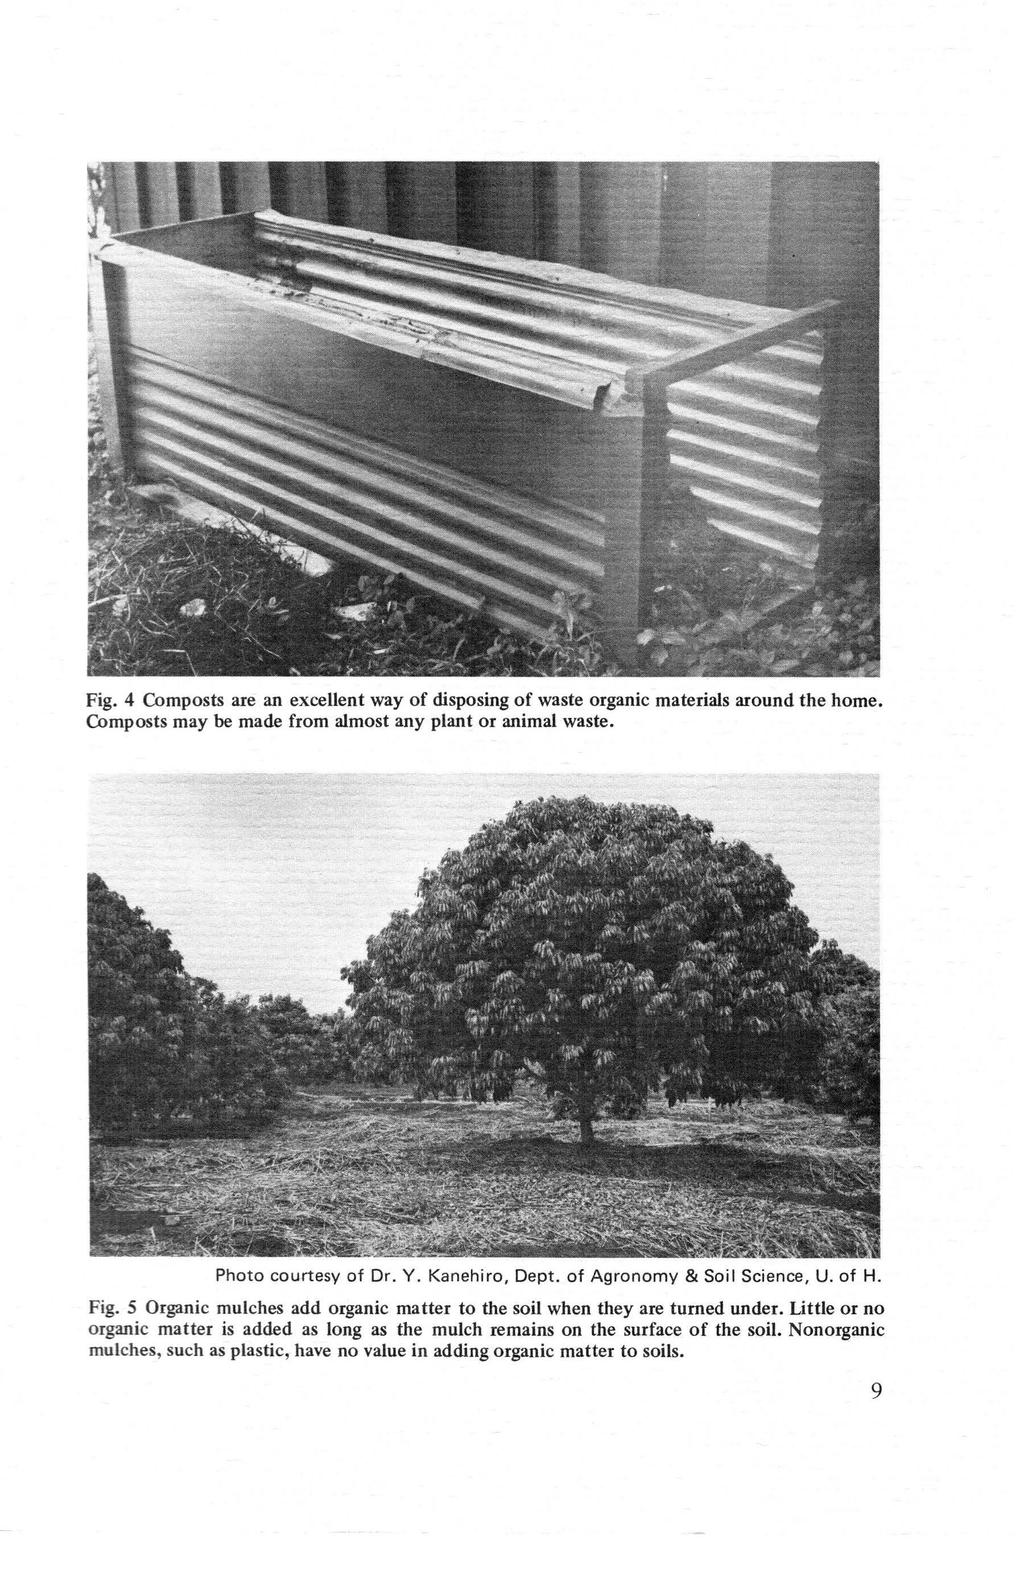 Fig. 4 Composts are an excellent way of disposing of waste organic materials around the home. Composts may be made from almost any plant or animal waste. Photo courtesy of Dr. Y. Kanehiro, Dept.